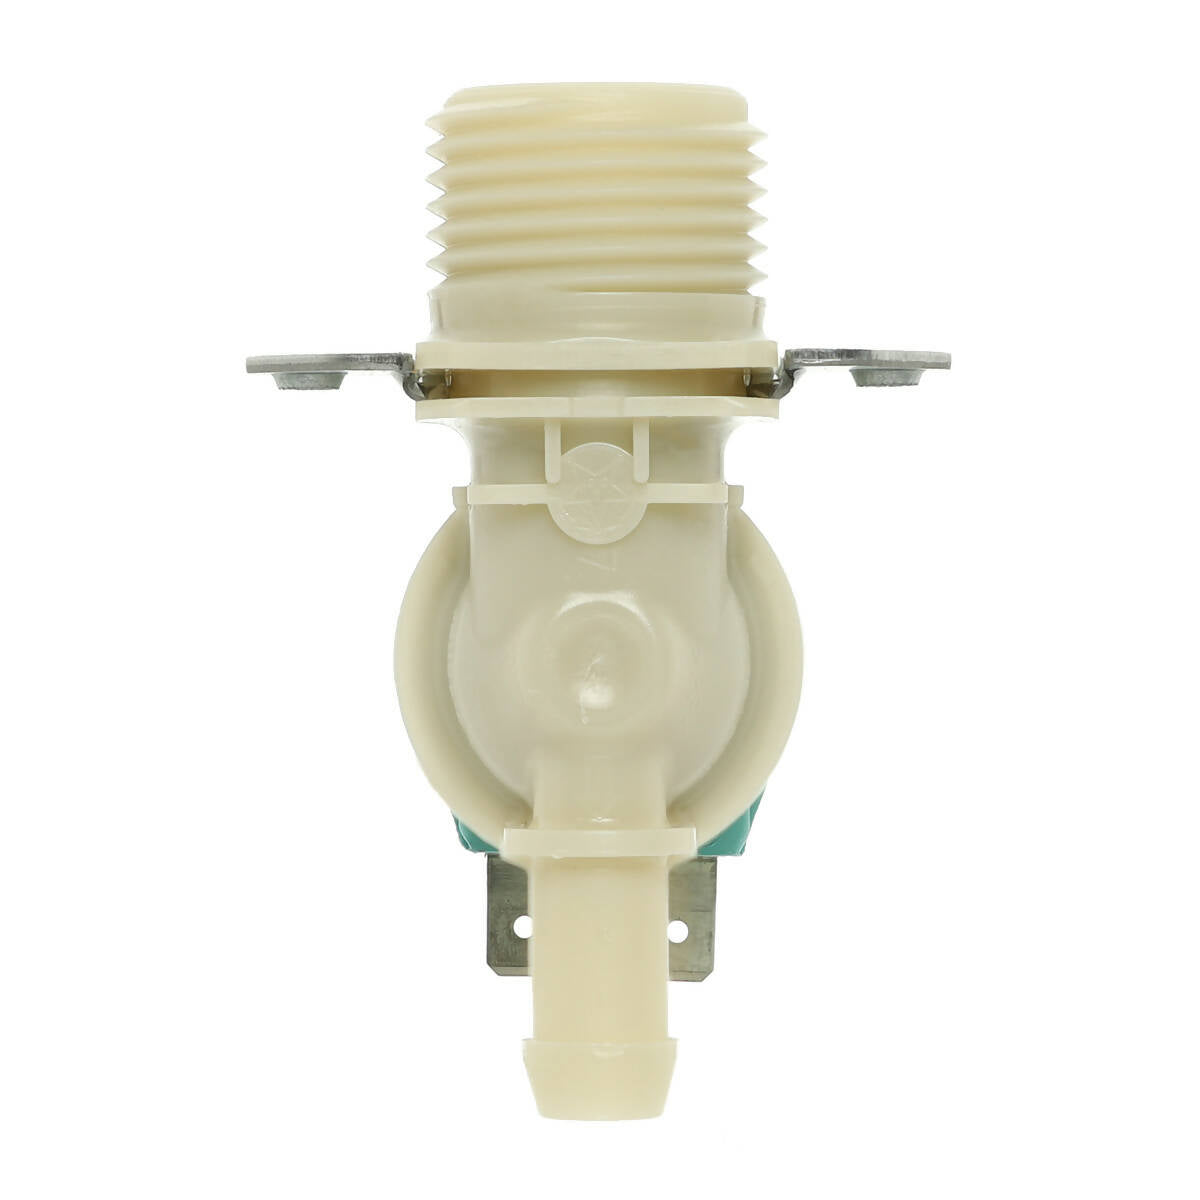 LG Washer Hot Water Inlet Valve - 5220FR2006H, Replaces: 5220FR2006L 5220FR2006Q 1268123 AP4441935 PS3527427 EAP3527427 PD00001765